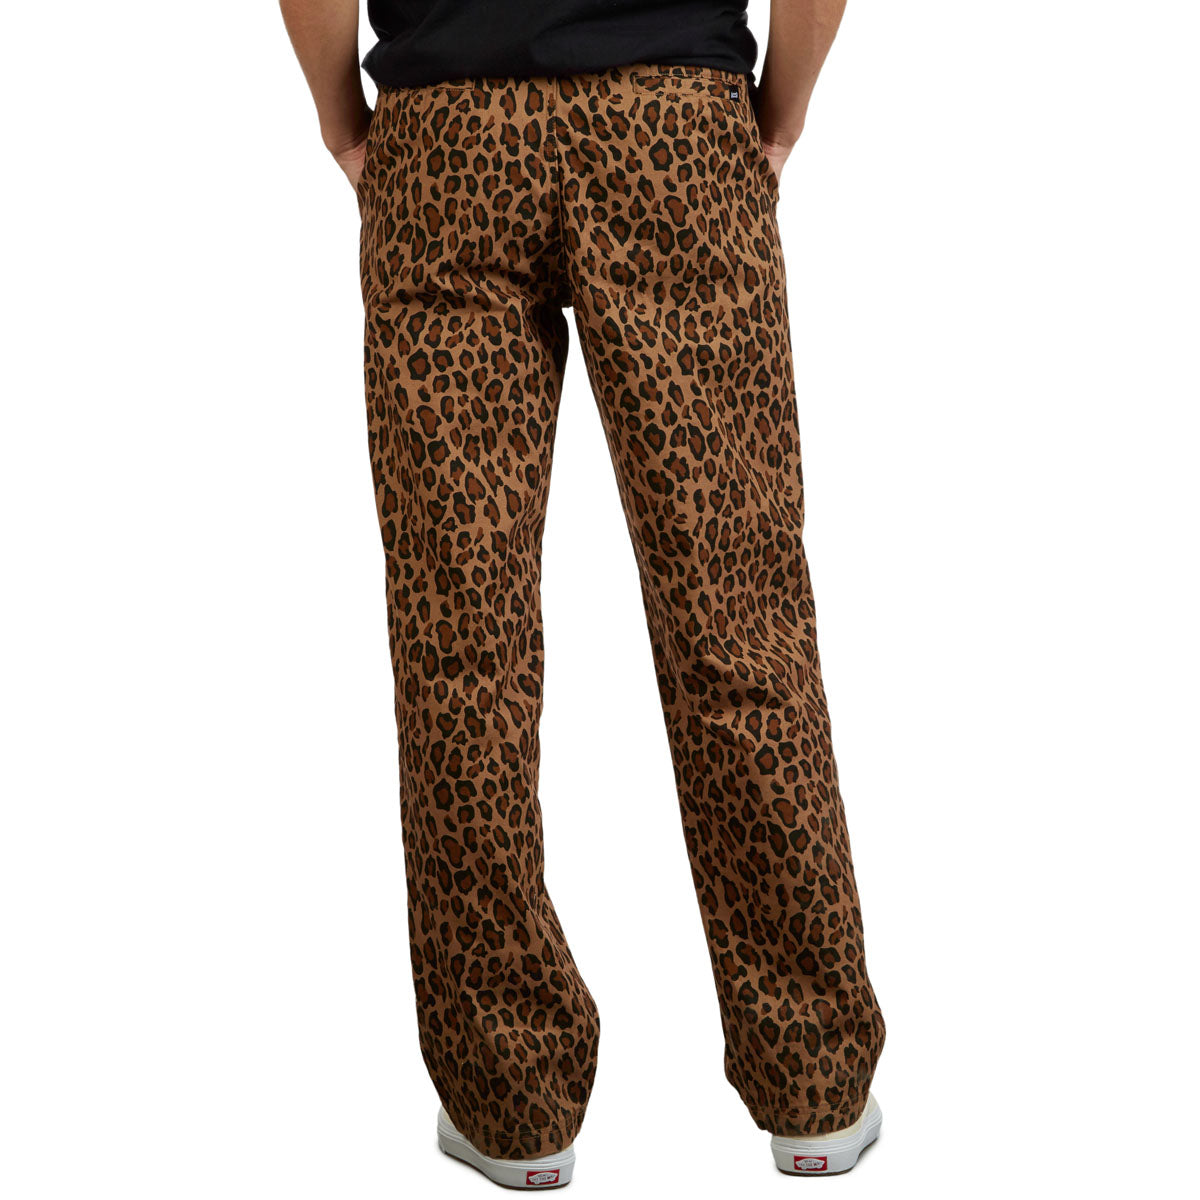 CCS Original Relaxed Chino Pants - Leopard image 3